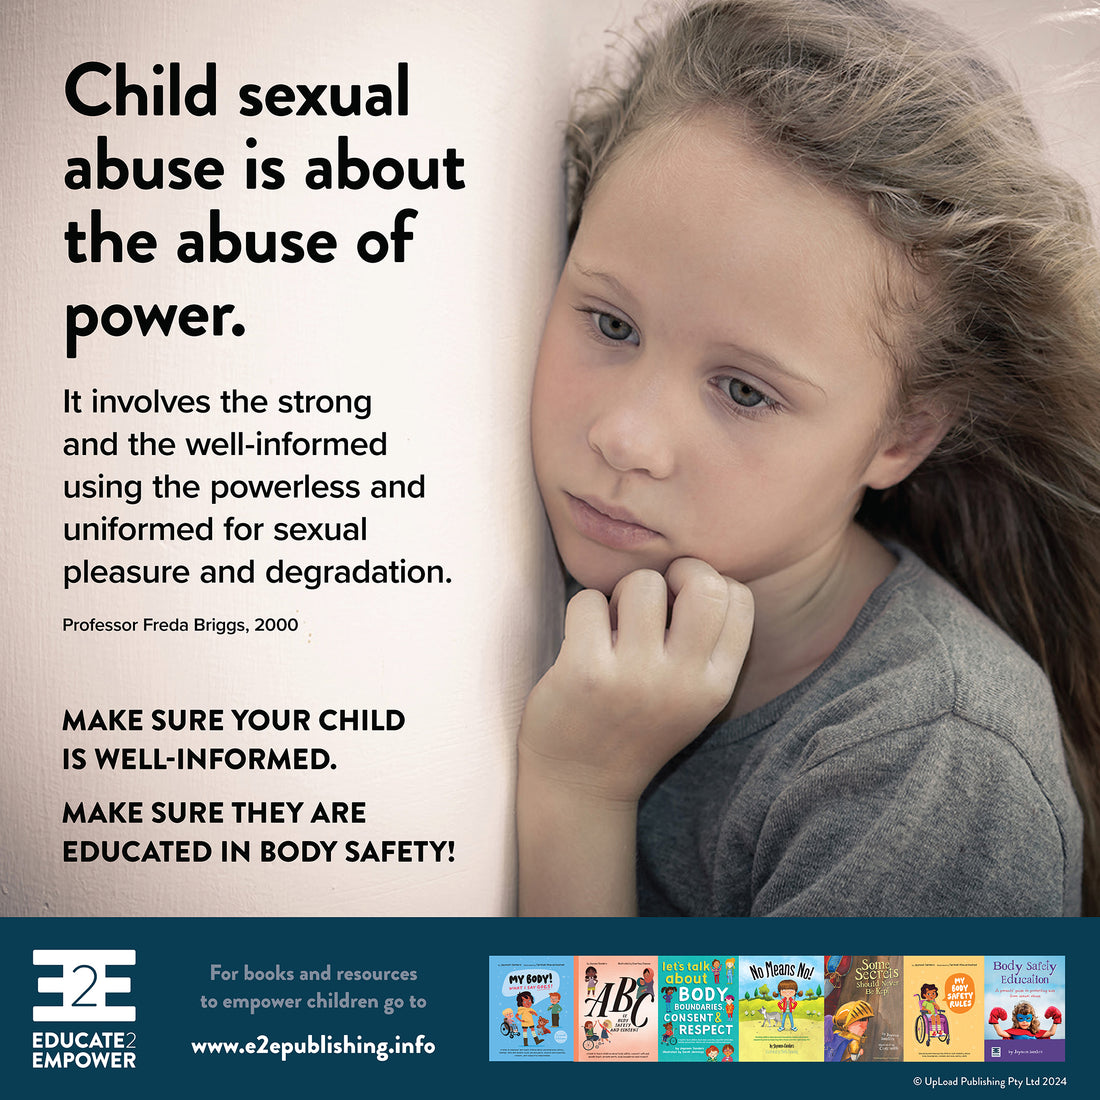 Child sexual abuse is about the abuse of power.